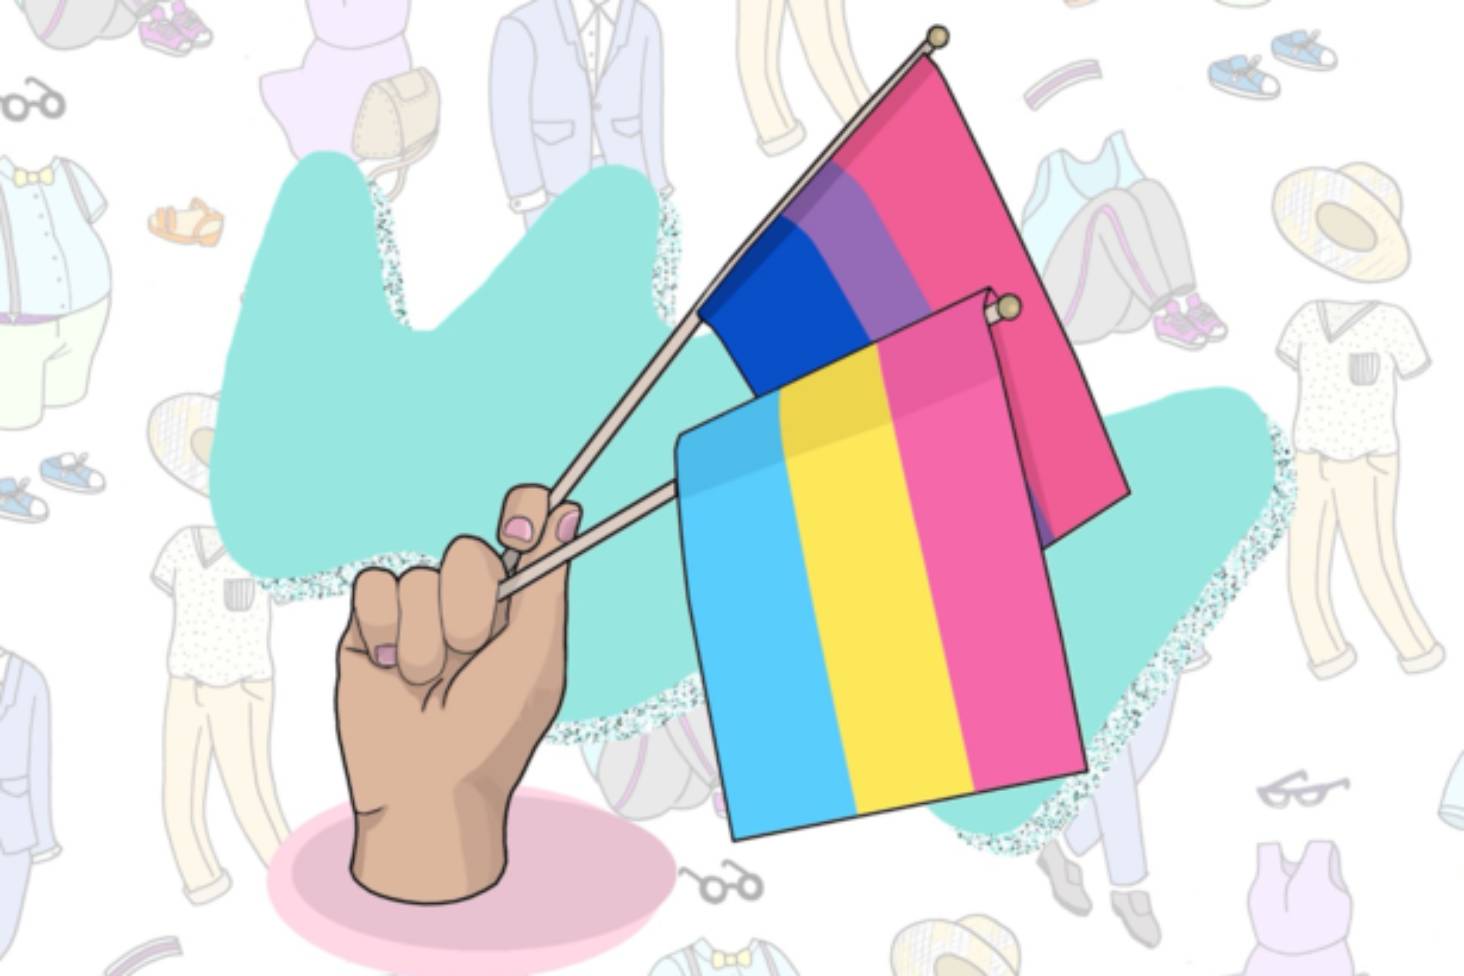 BANG!: The struggles of being bisexual: When you're 'not gay enough' and 'not straight enough'